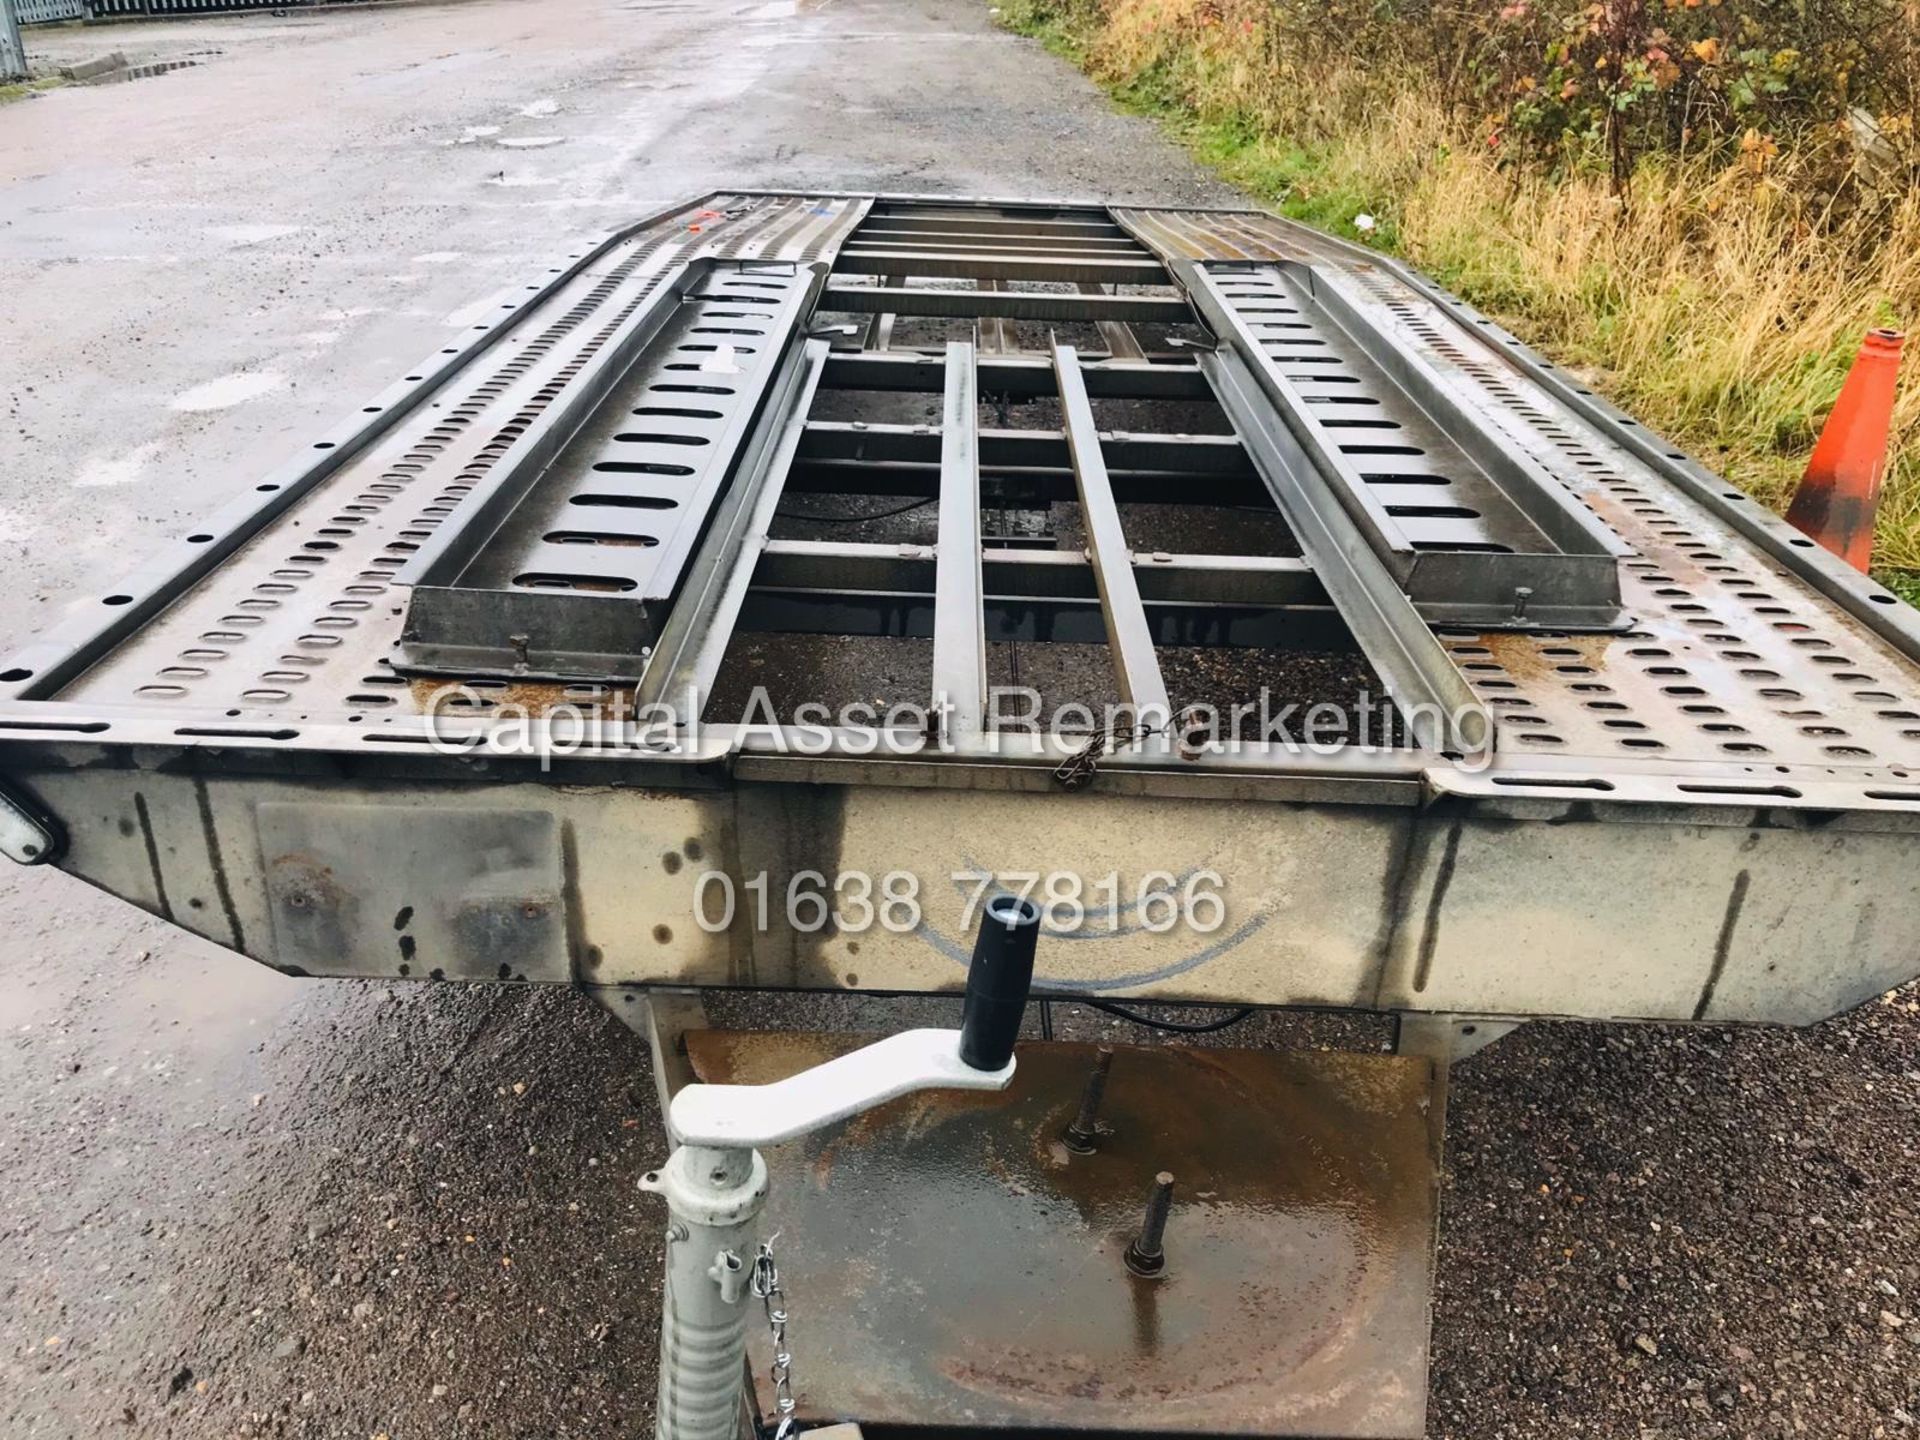 (On Sale) BRIAN JAMES TYPE (PRG) RECOVERY / TRANSPORTER TRAILER - 17 FOOT (NO VAT) - Image 5 of 7